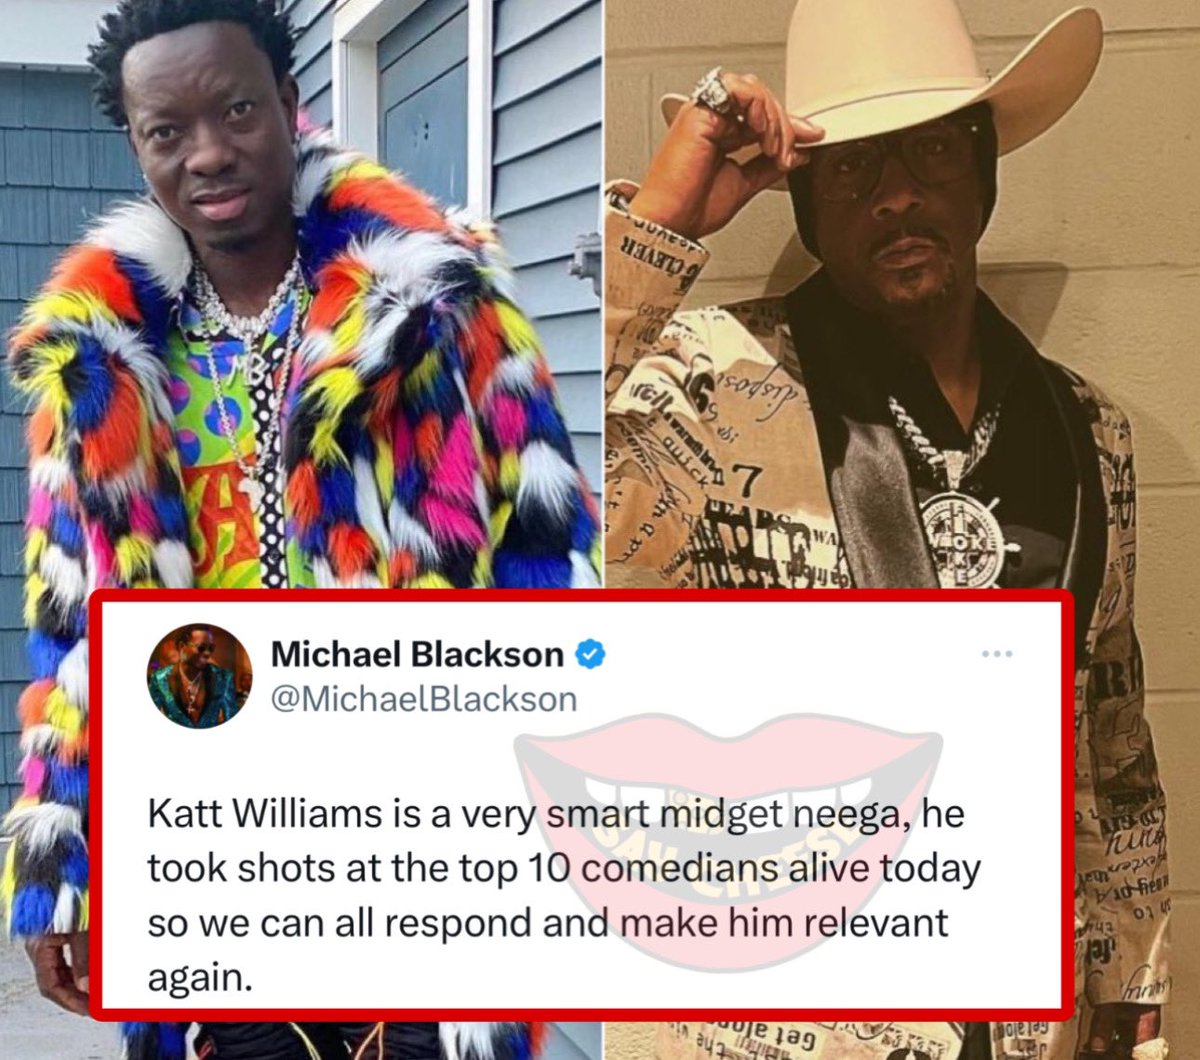 Michael Blackson responds to Katt Williams: “He took shots at the top 10 comedians alive today so we can respond and make him relevant again”